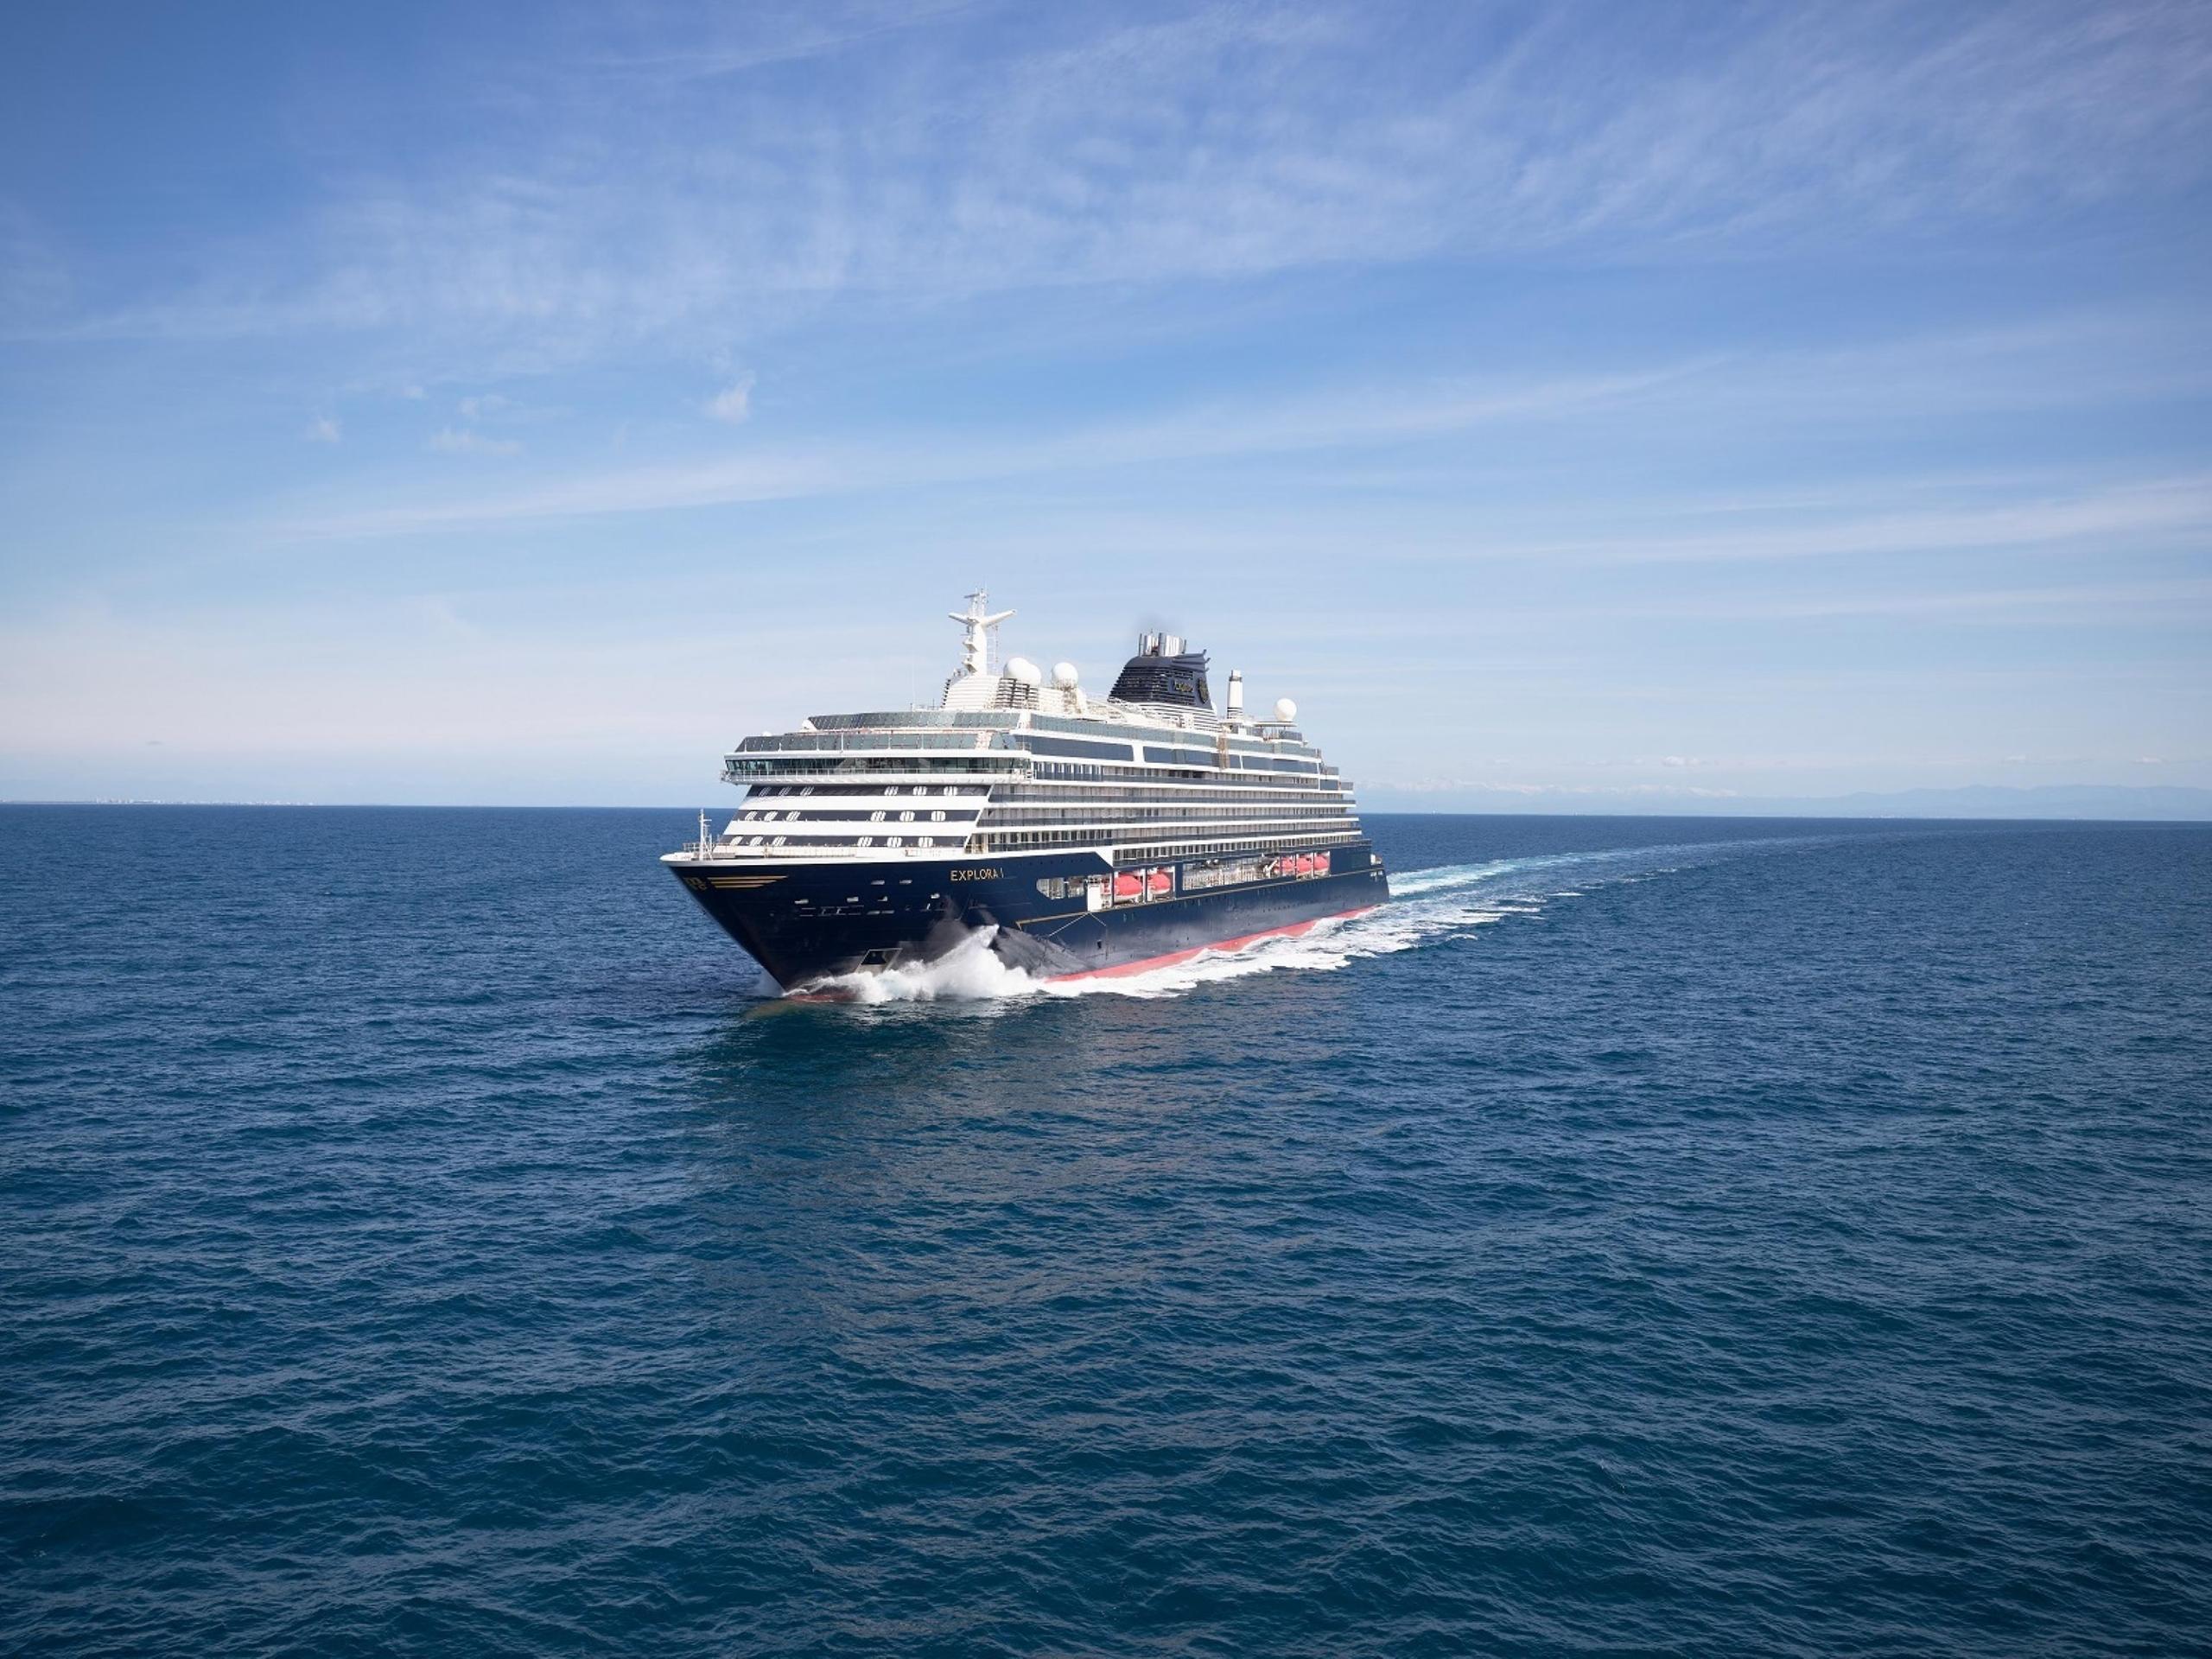 Fincantieri, delivery of the Explora I has been delayed for safety reasons